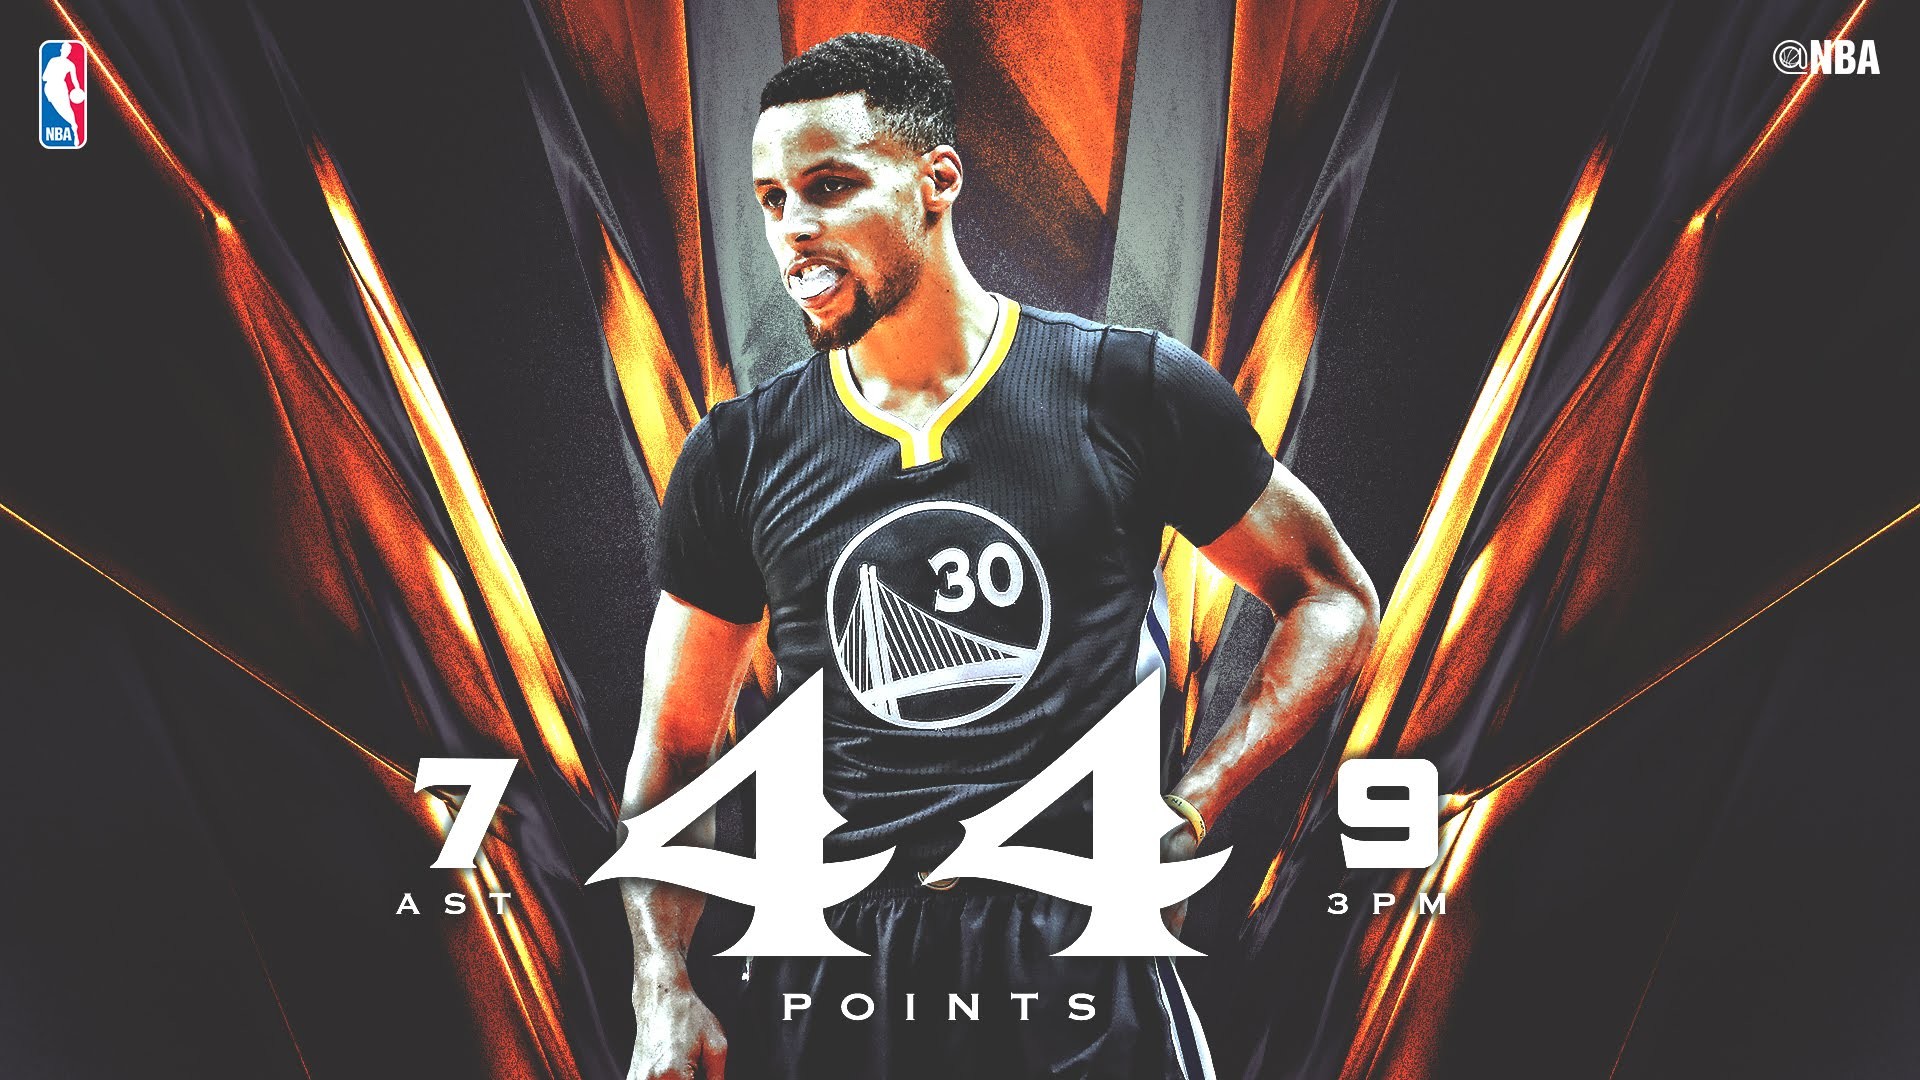 1920x1080 Stephen Curry Shooting Backgrounds On High Resolution Wallpaper